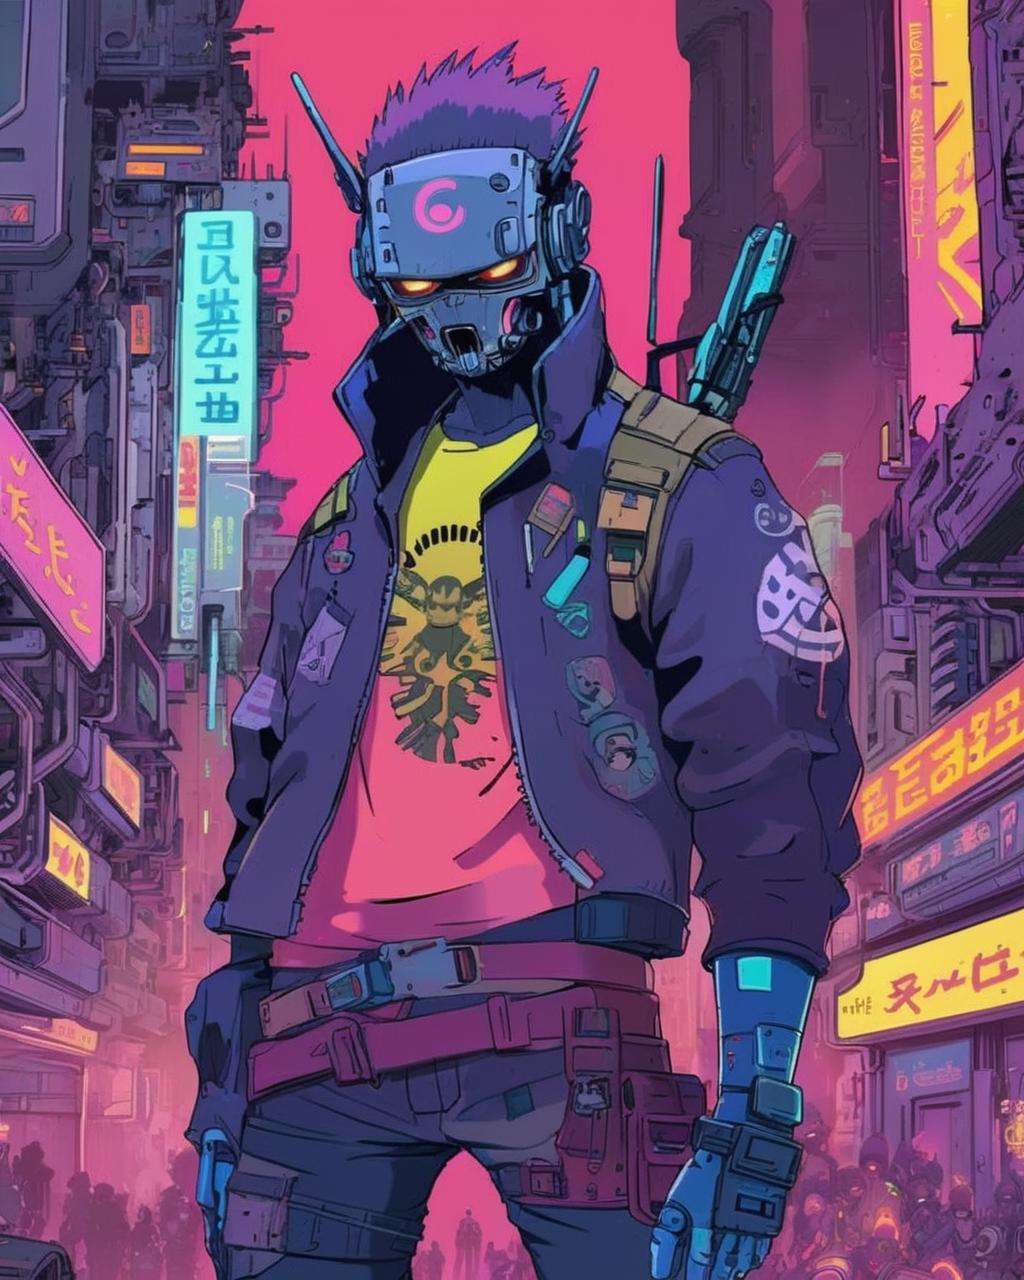 anime, A final stand, rebels and cyber-enhanced heroes rallying against an onslaught of digital monstrosities, the clash of worlds erupting in a blaze of neon and fury.,  cyberpunk, cyberpunk art, retrofuturism<lora:Cyberpunk _Anime_sdxl:1.0>